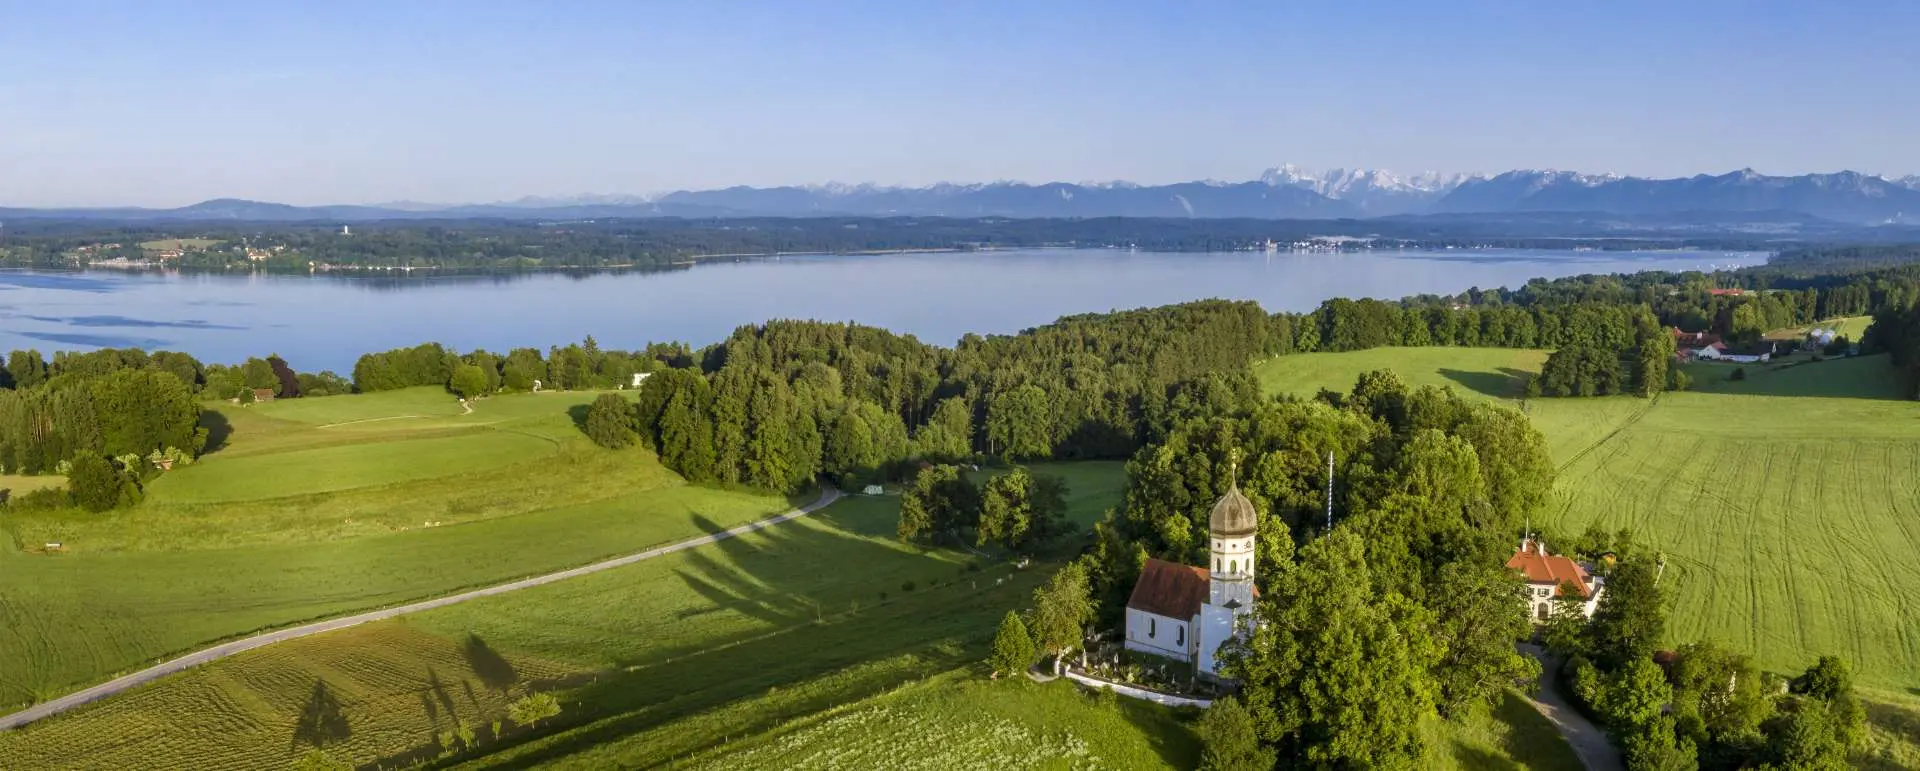 Lake Starnberg - the destination for group hotels with parking spaces